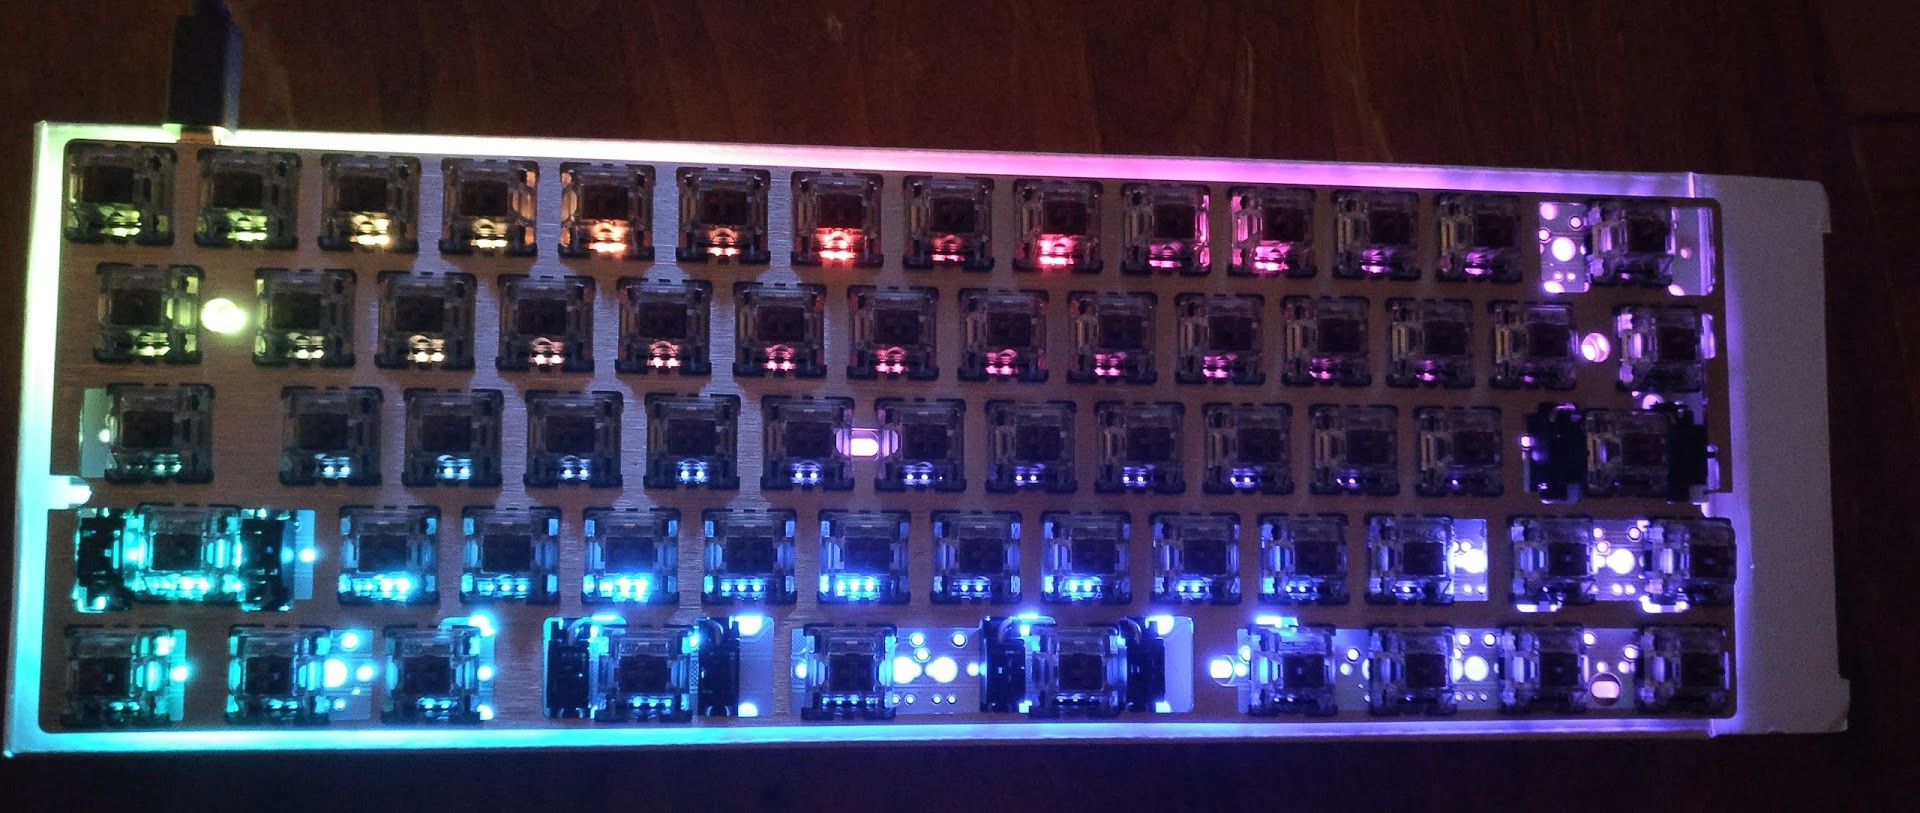 The DZ60's underglow without any casing to cover it